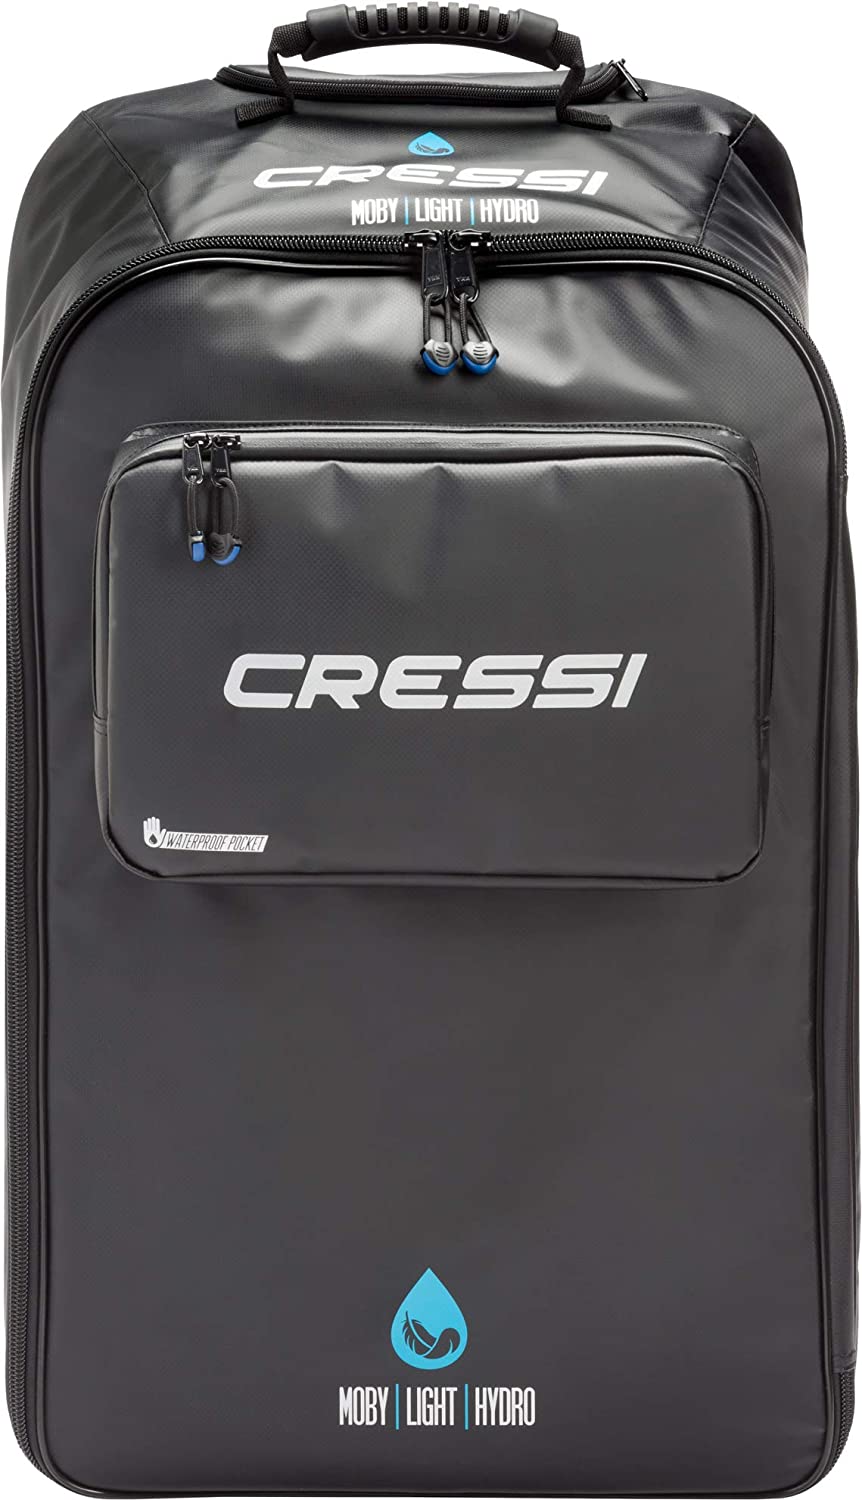 Cressi Moby Light Hydro